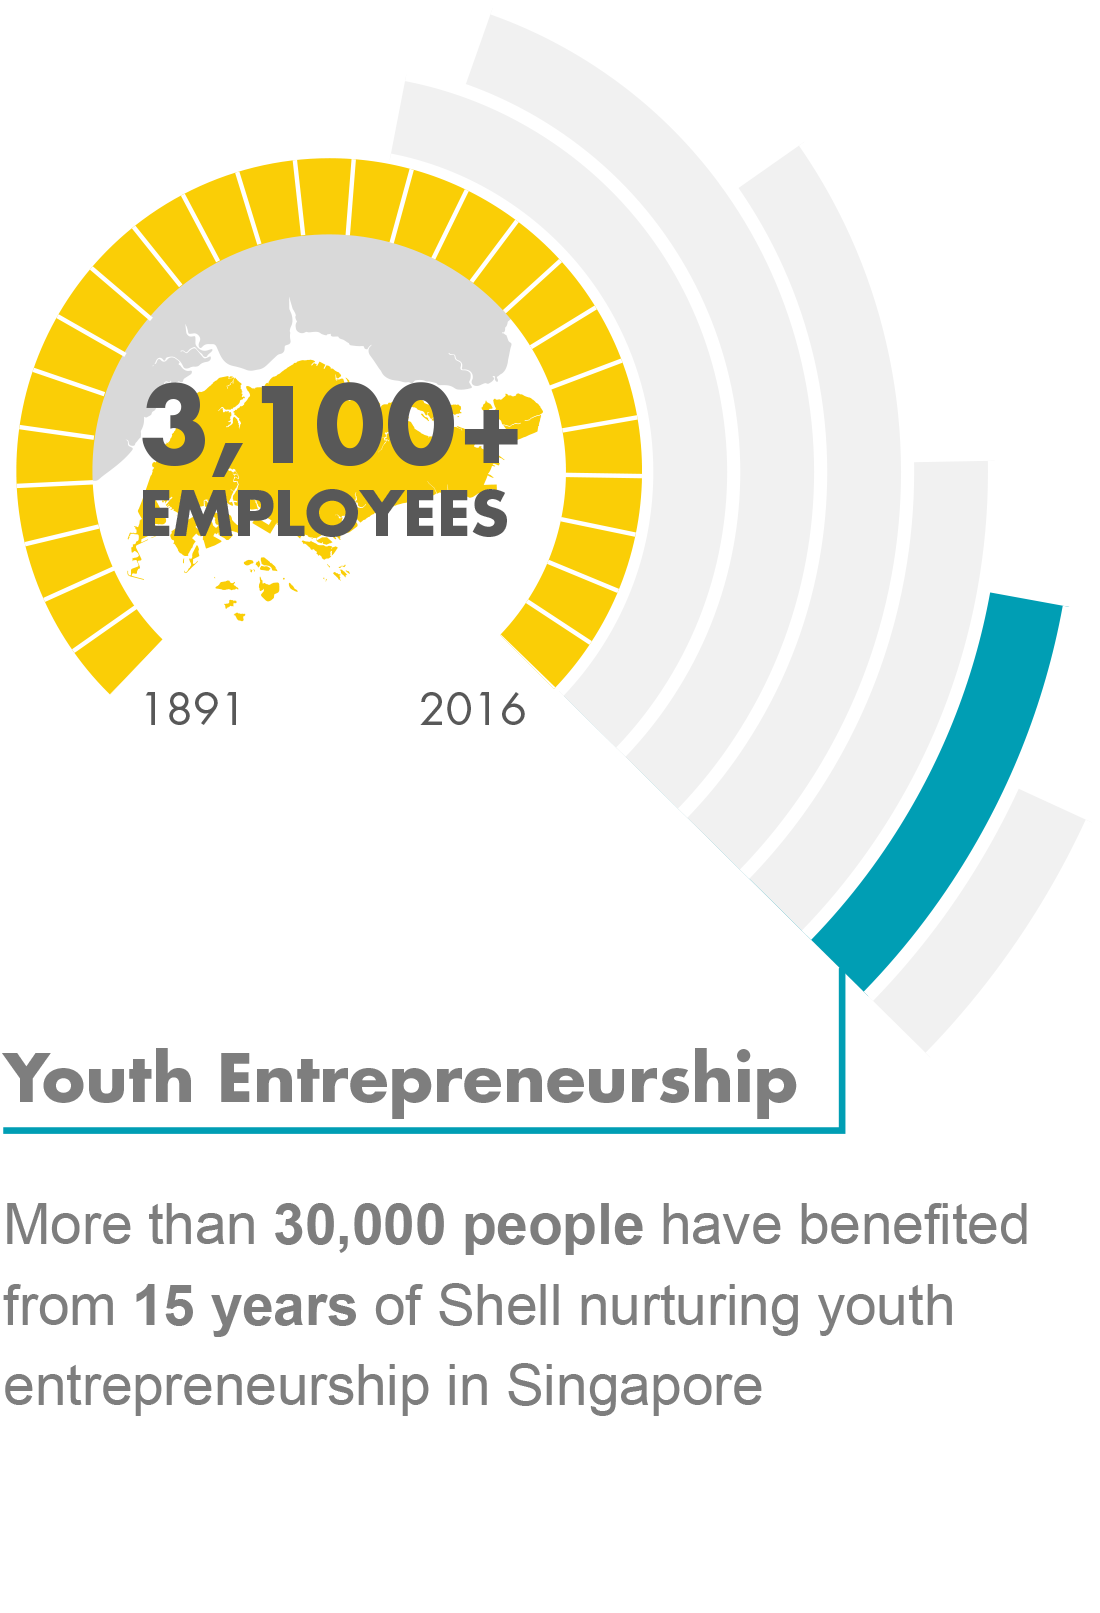 Youth Enterpreneurship - More than 30,000 people have benefited from 15 years of Shell nuturing youth entrepreneurship in Singapore